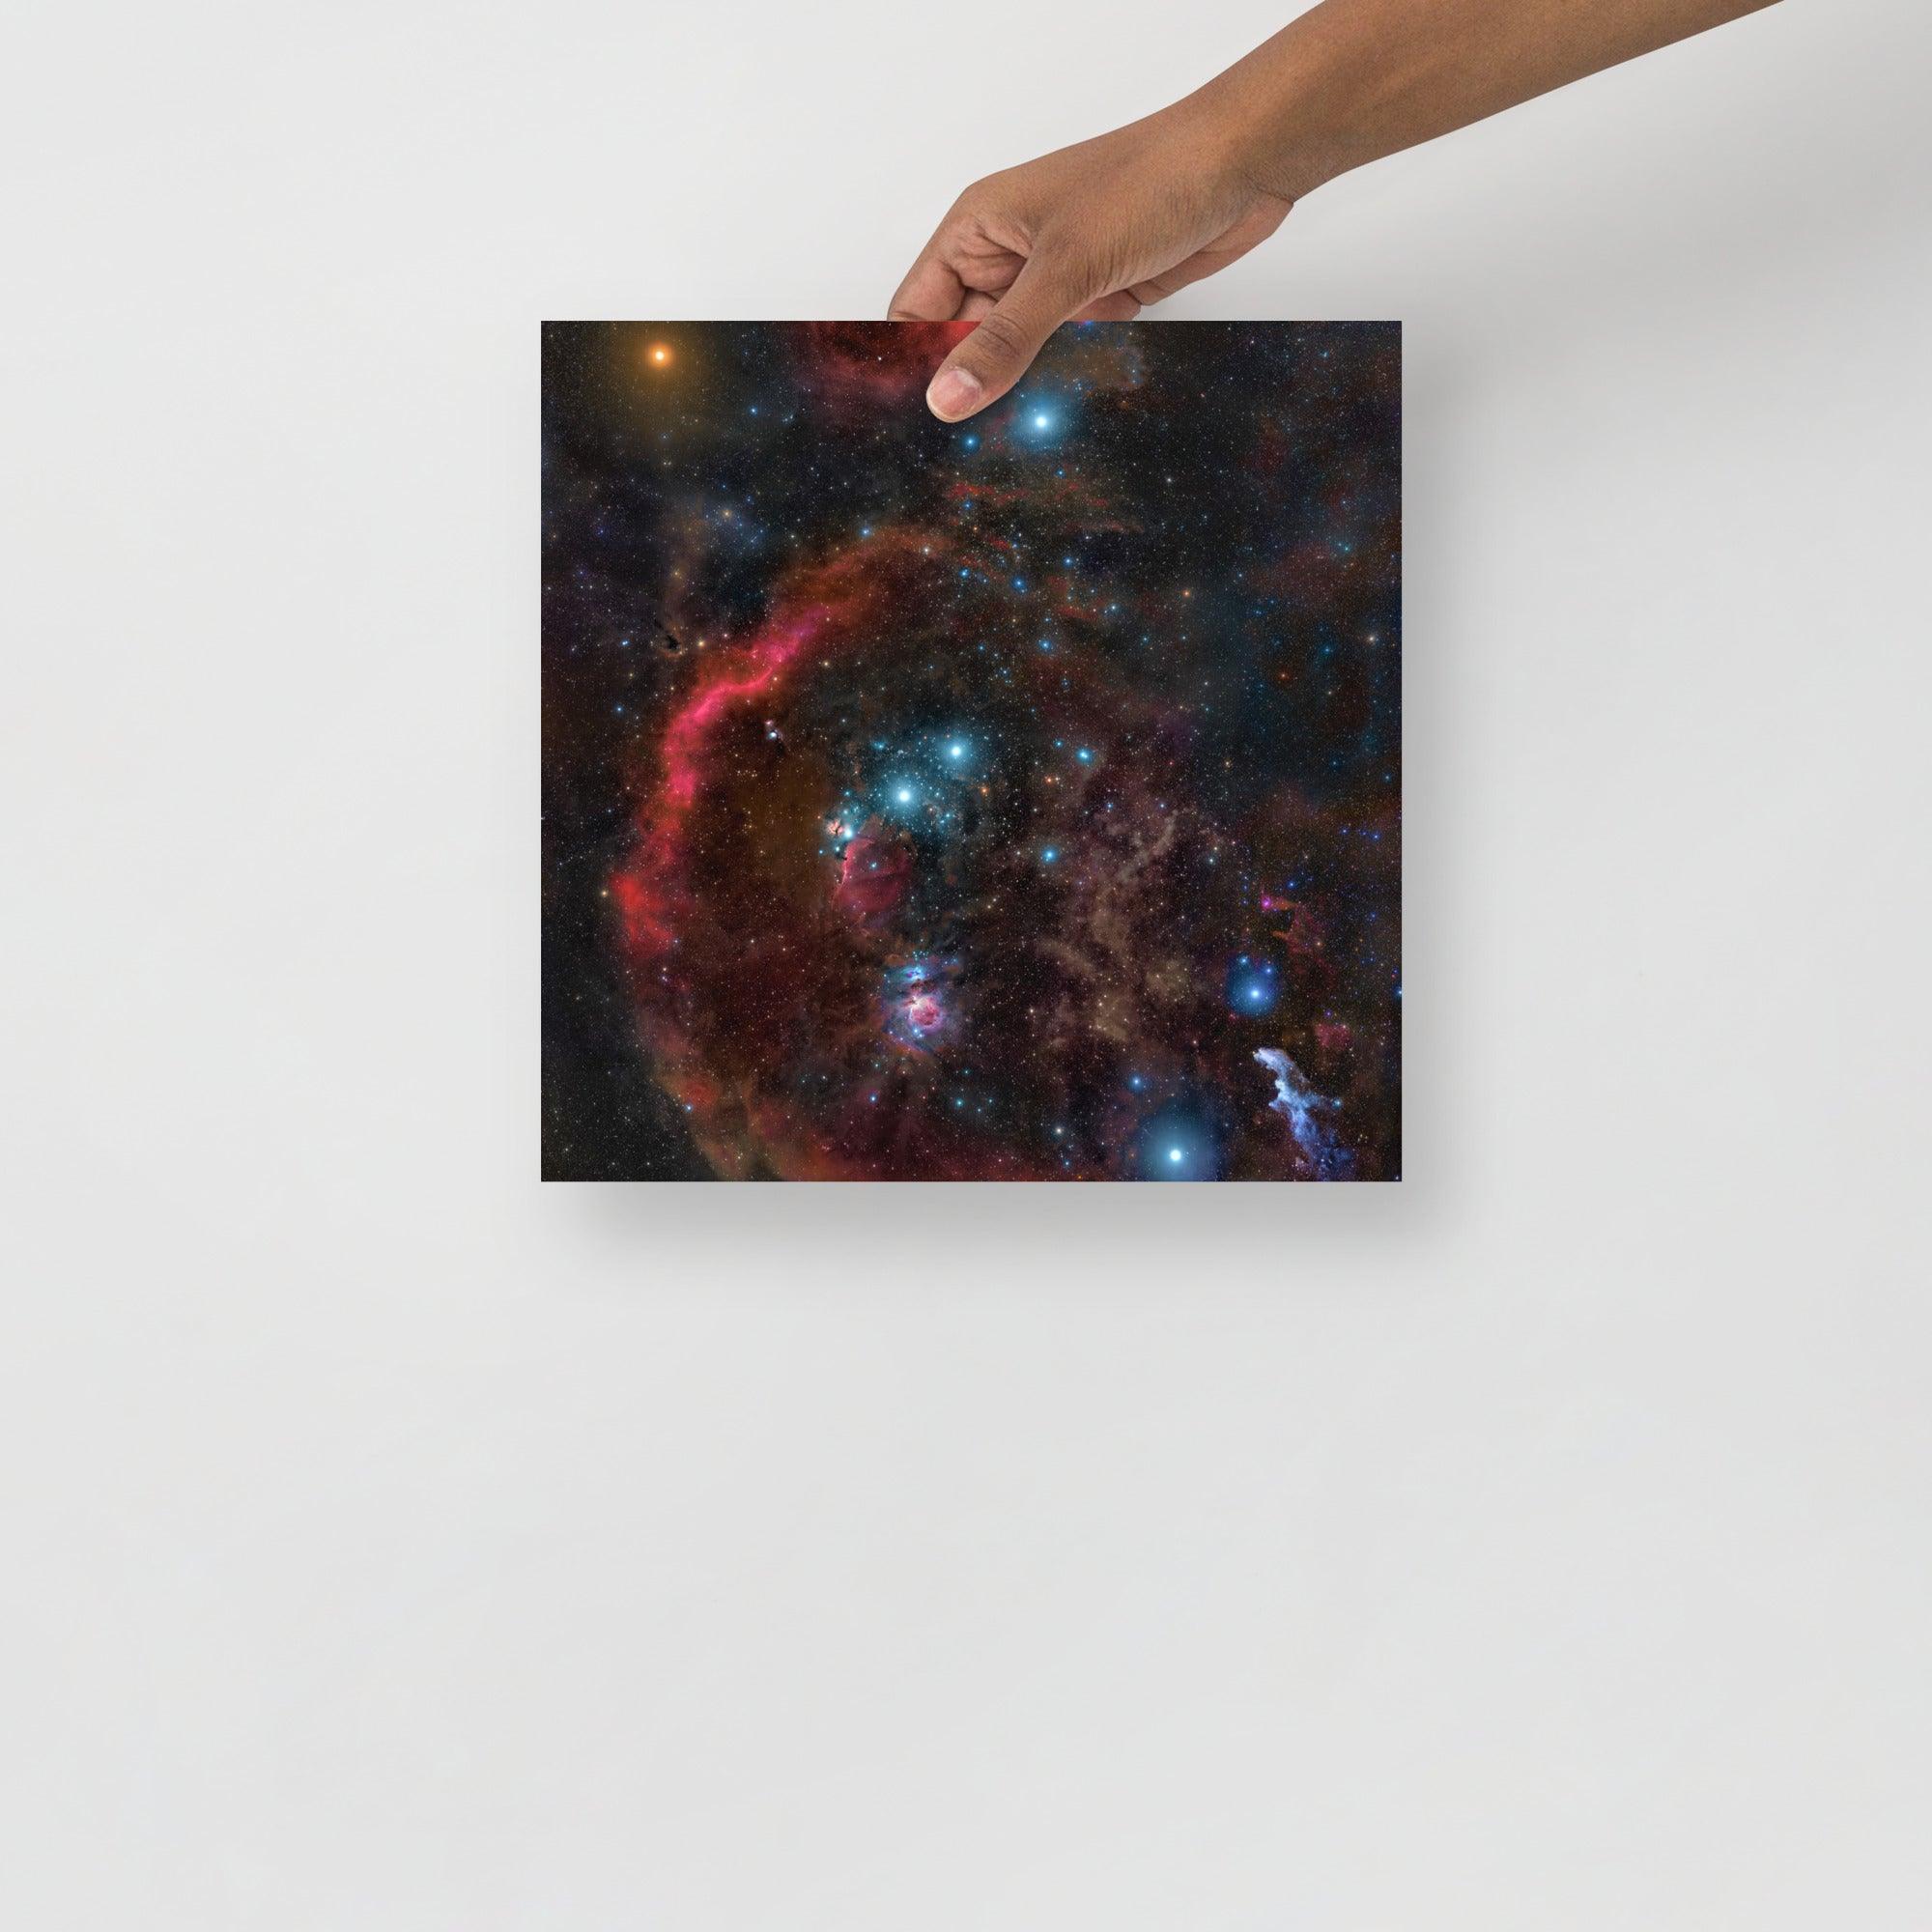 An Orion Constellation poster on a plain backdrop in size 12x12”.